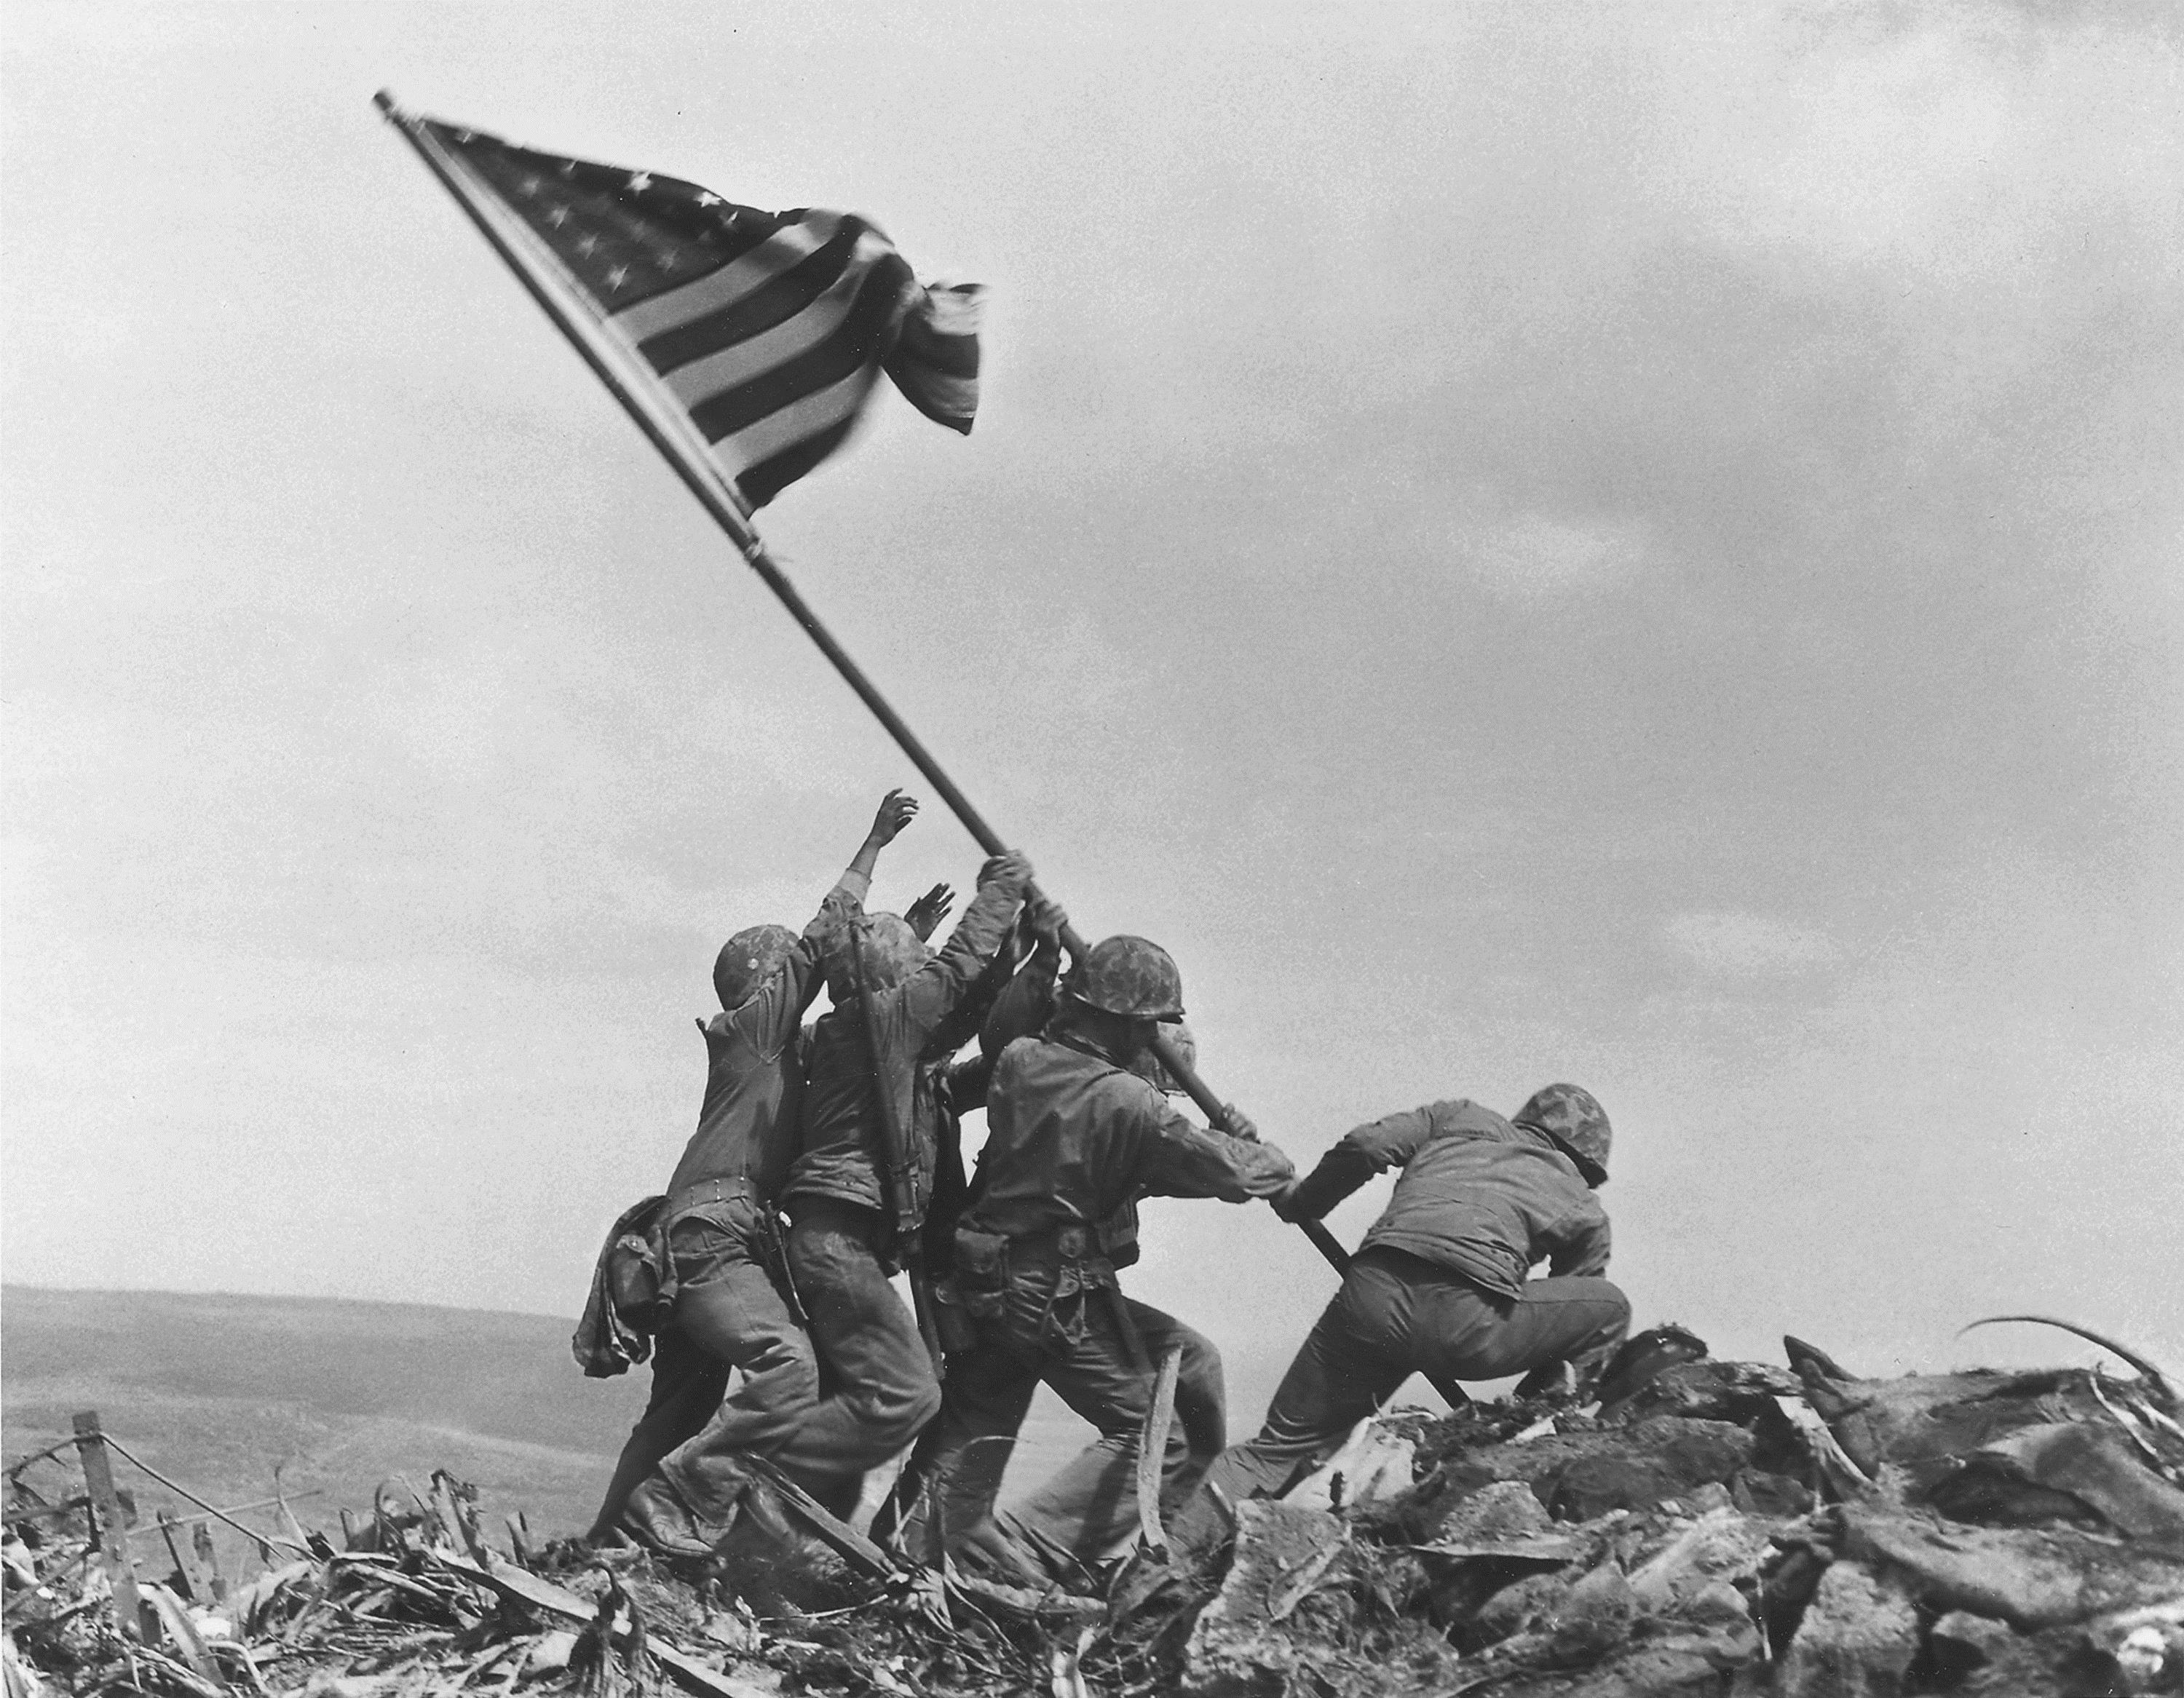 In this Feb 23, 1945 file photo, U.S. Marines of the 28th Regiment, 5th Division, raise the American flag atop Mt. Suribachi, Iwo Jima, Japan. Krelle's and Foley's research found that the man second from right is Franklin Sousley, not John Bradley. Sousley was originally thought to be the man second from the left, but that's Harold Schultz, Marines confirmed June 23. (AP)